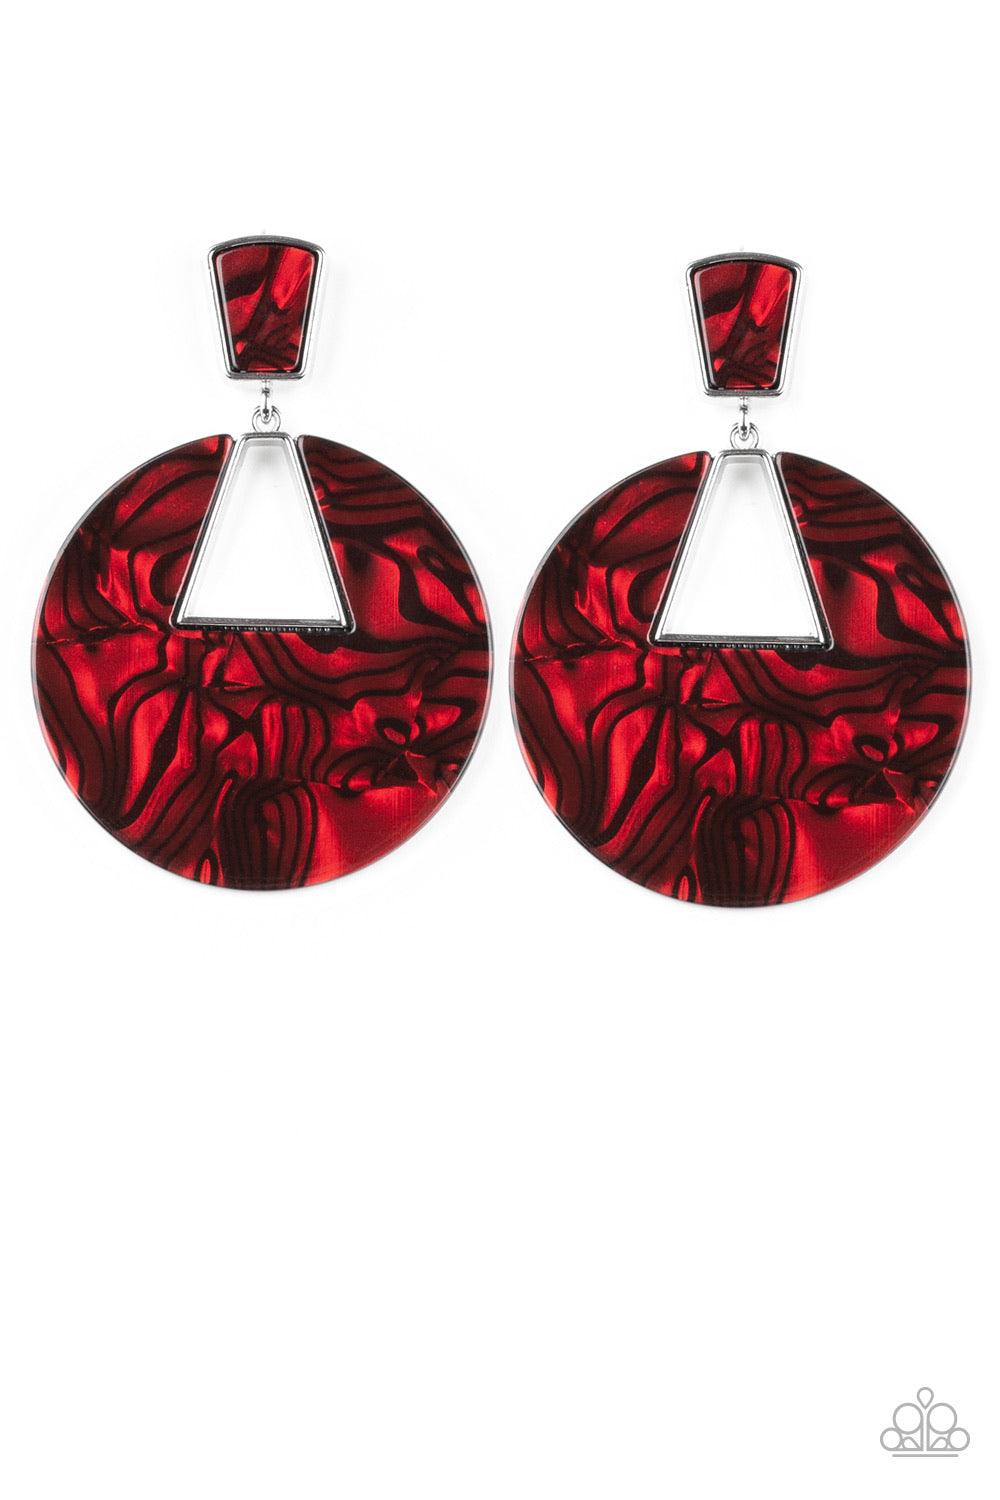 Paparazzi Accessories Let HEIR Rip! - Red Featuring a faux marble finish, a shimmering acrylic frame swings from the bottom of a matching acrylic fitting for a refined, retro look. Earring attaches to a standard post fitting. Jewelry